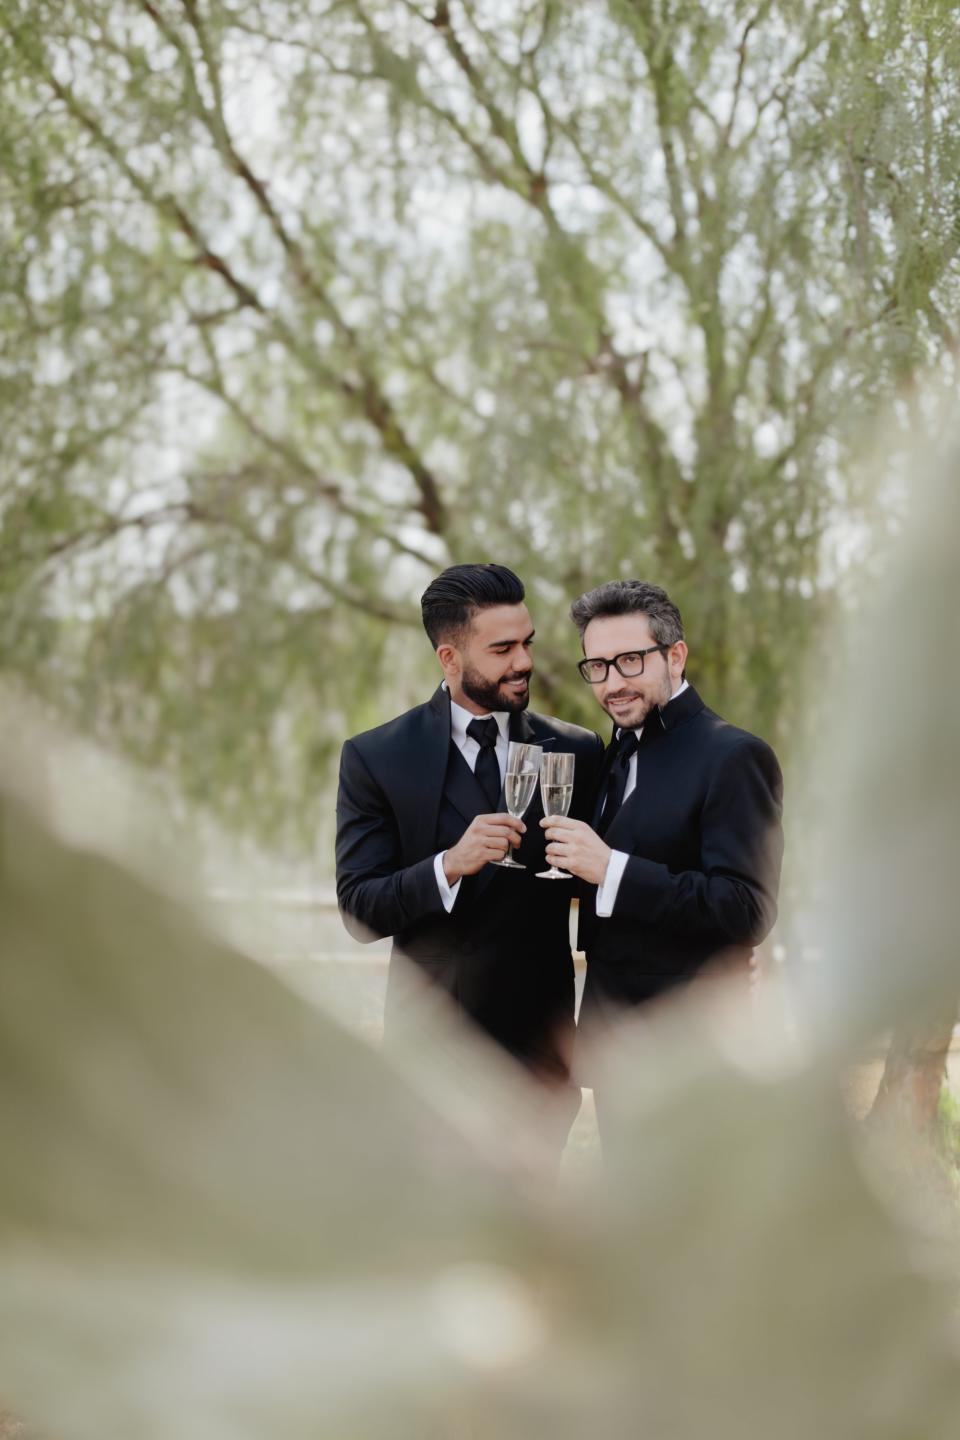 Adyan and Quintanilla met through a friend in 2020, and reconnected while working for the same company the following year.